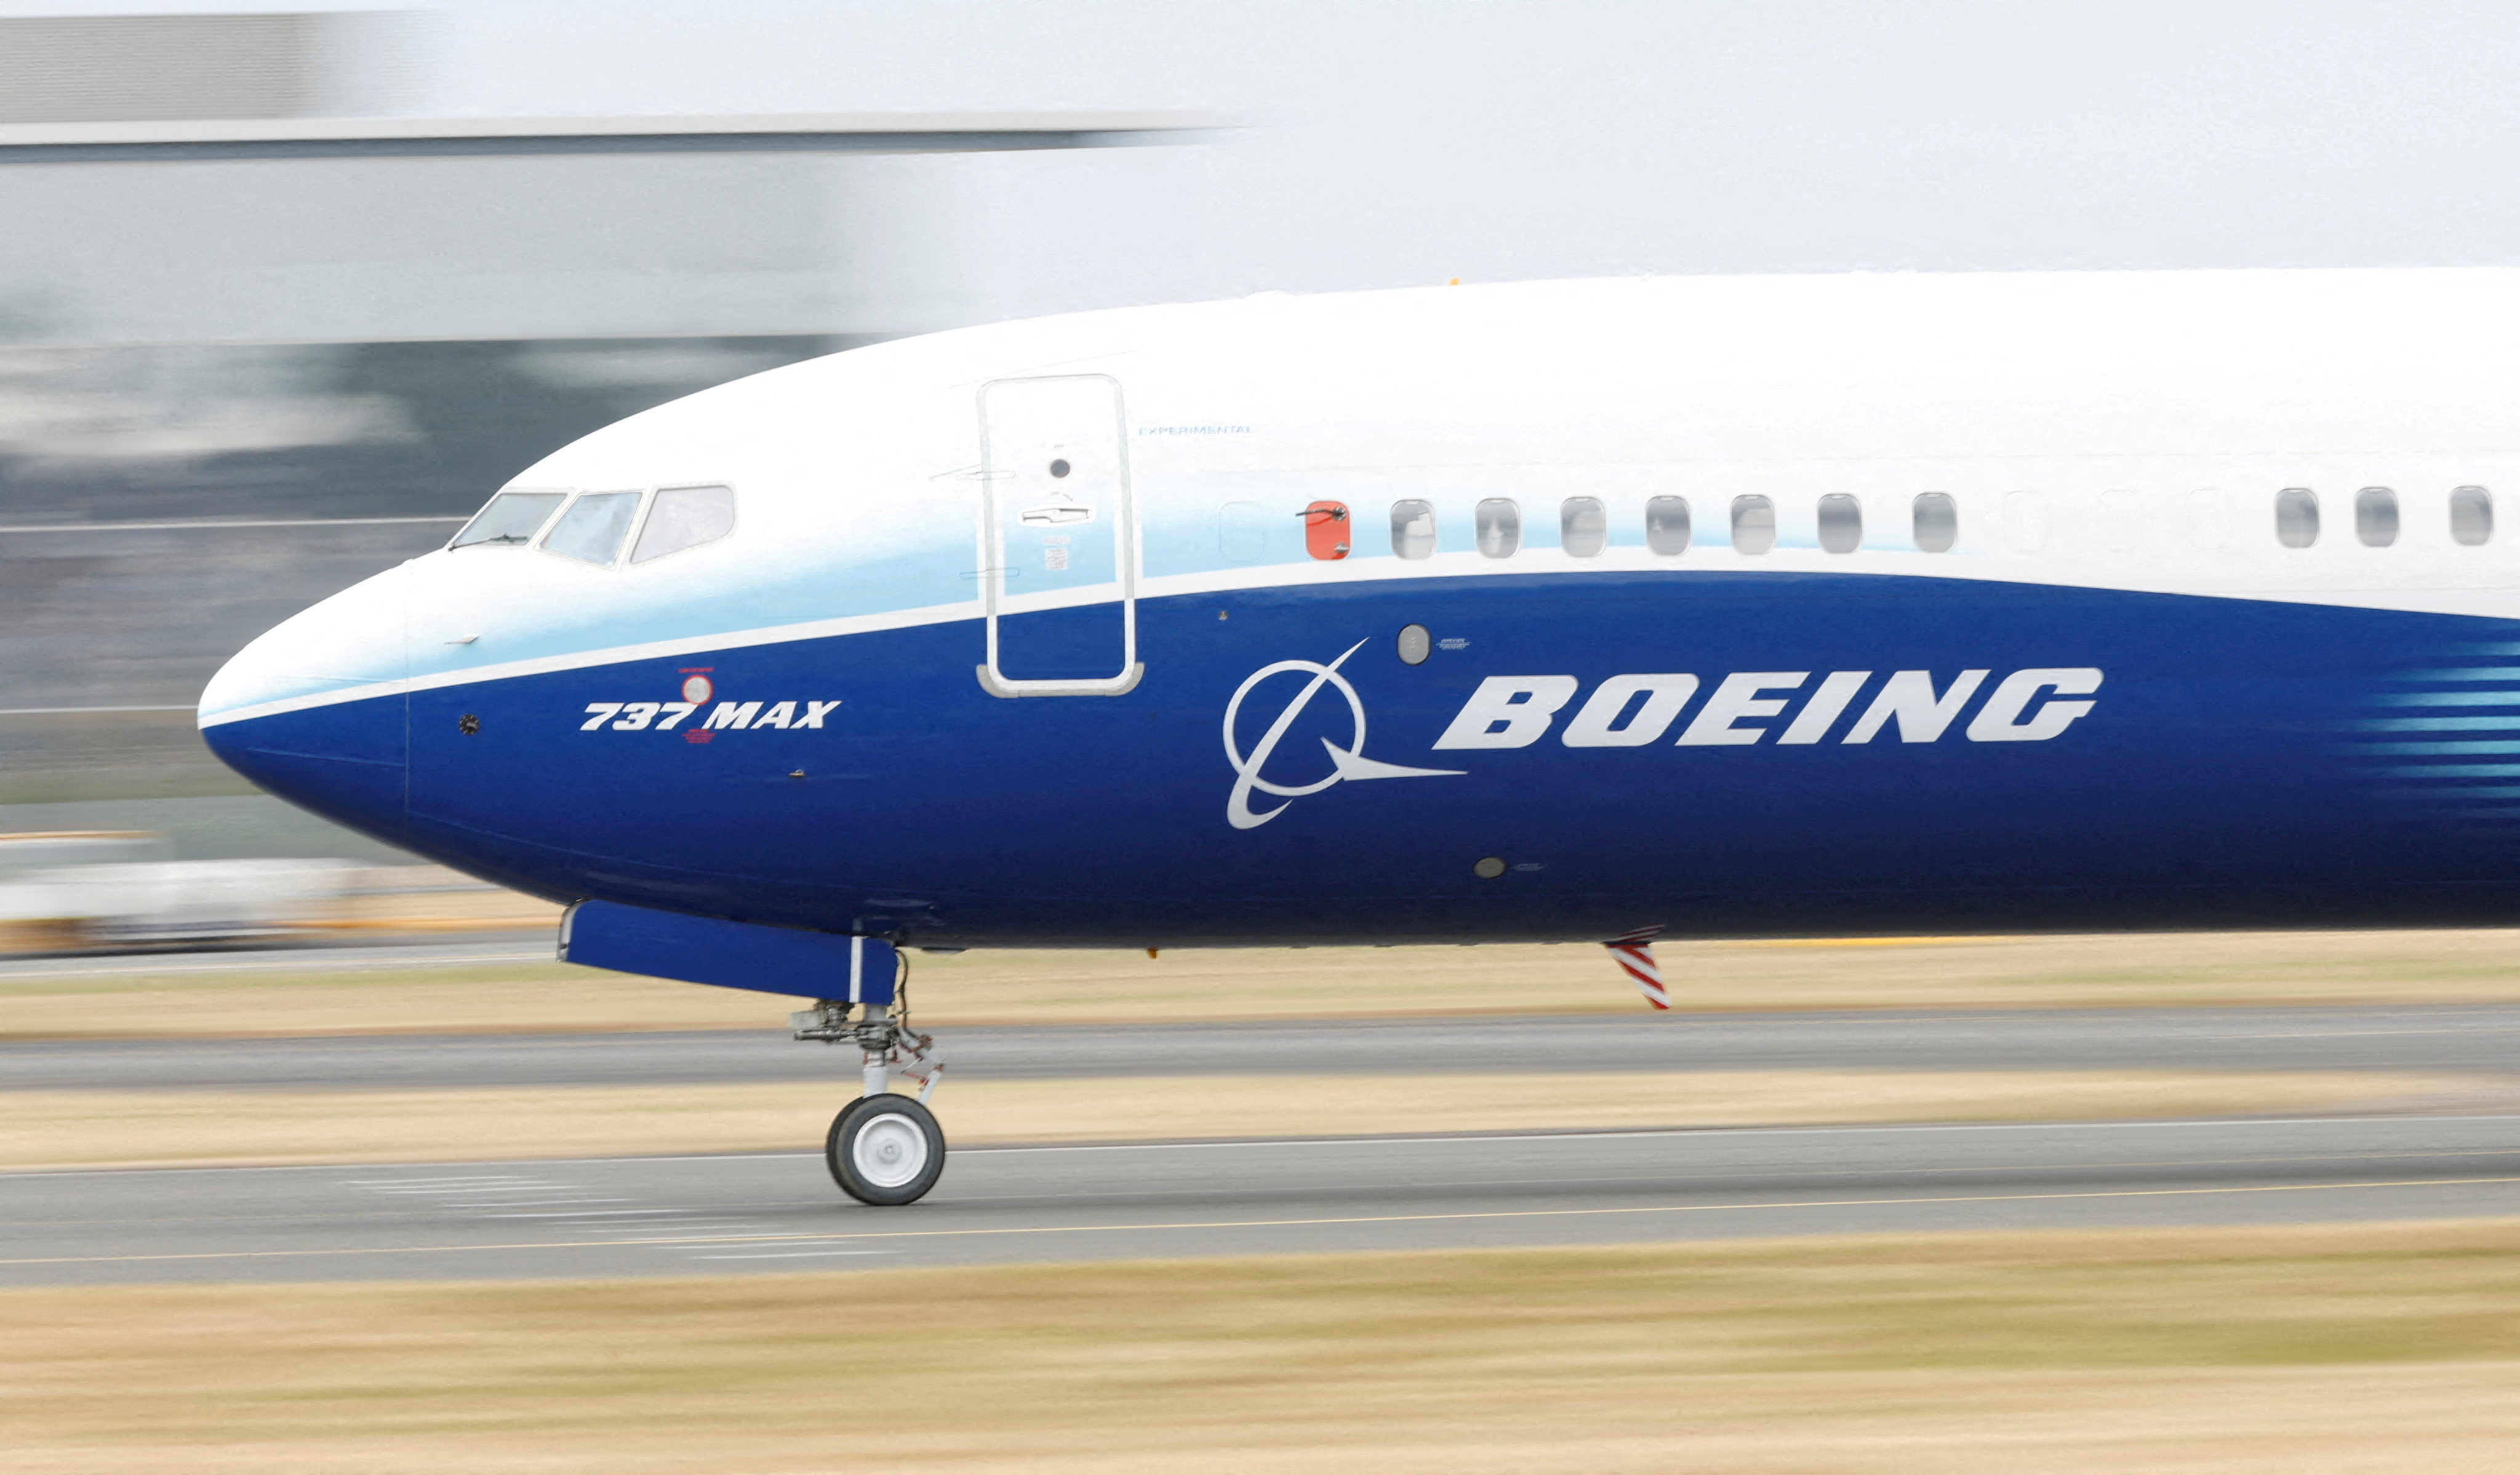 Boeing delivered18 737 MAX aircraft to Southwest Airlines in December, the most it has supplied to a single airline customer in a month. Photo: Reuters